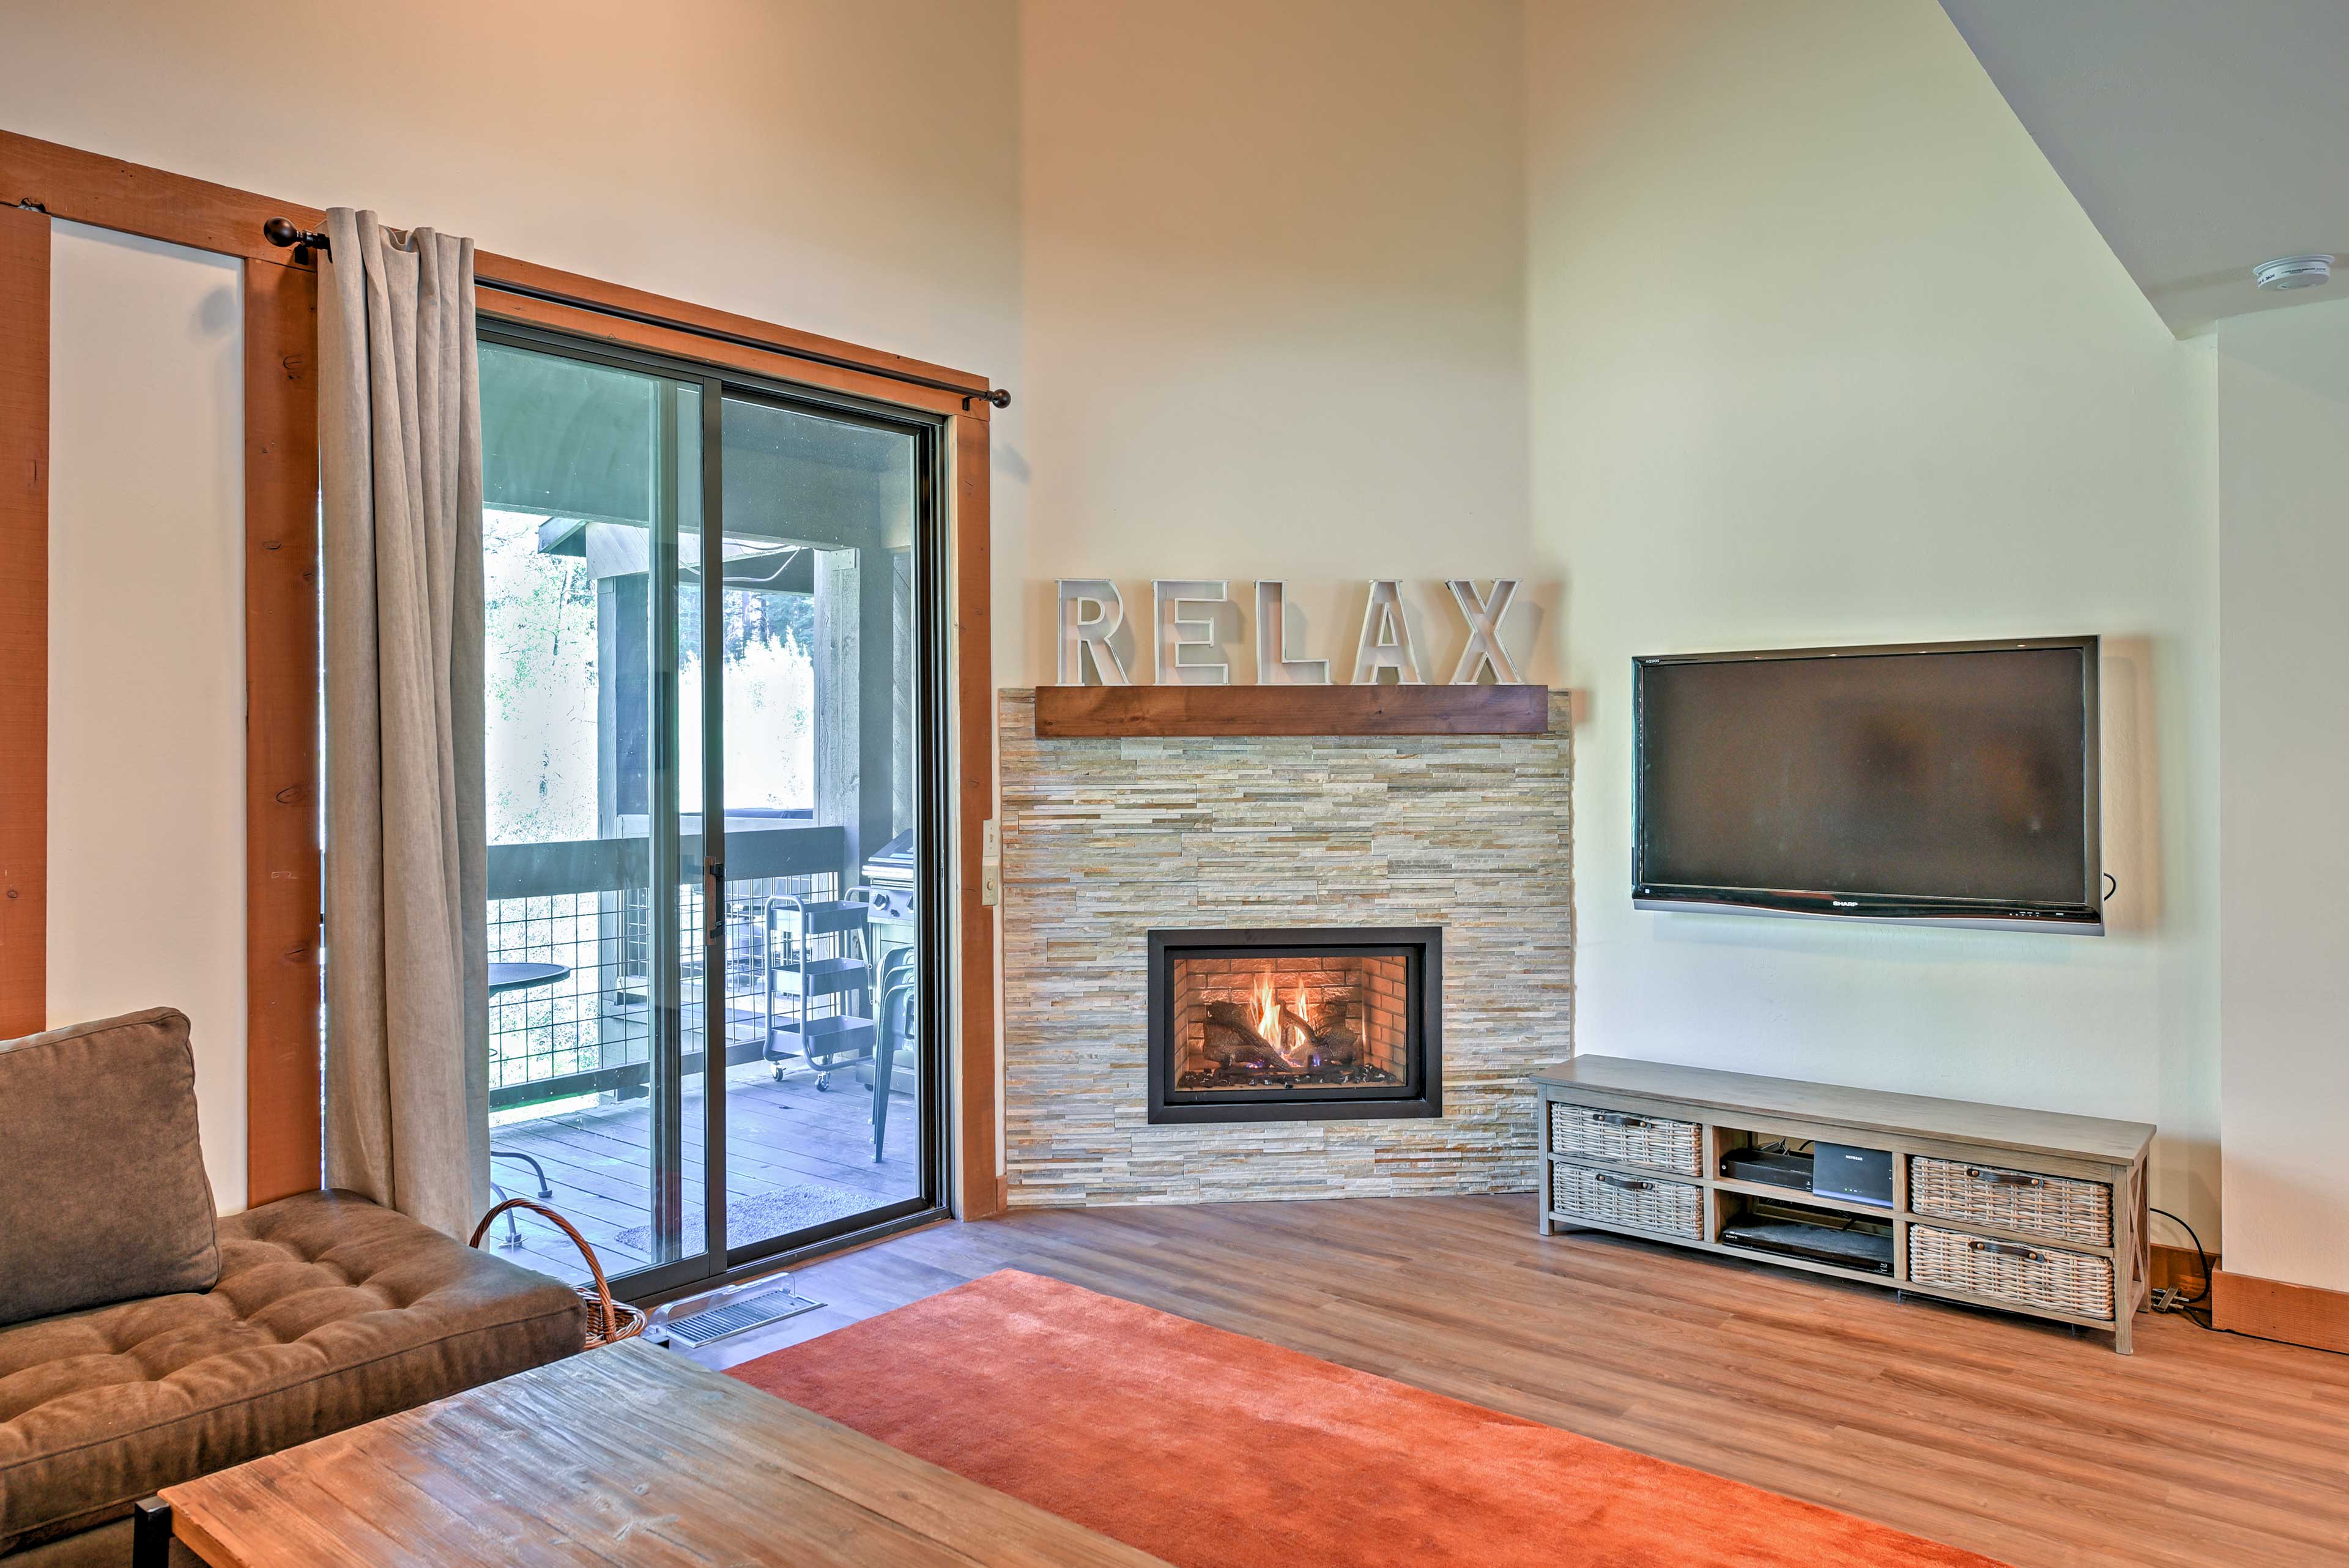 Cure your evening chills with this gas-burning fireplace.